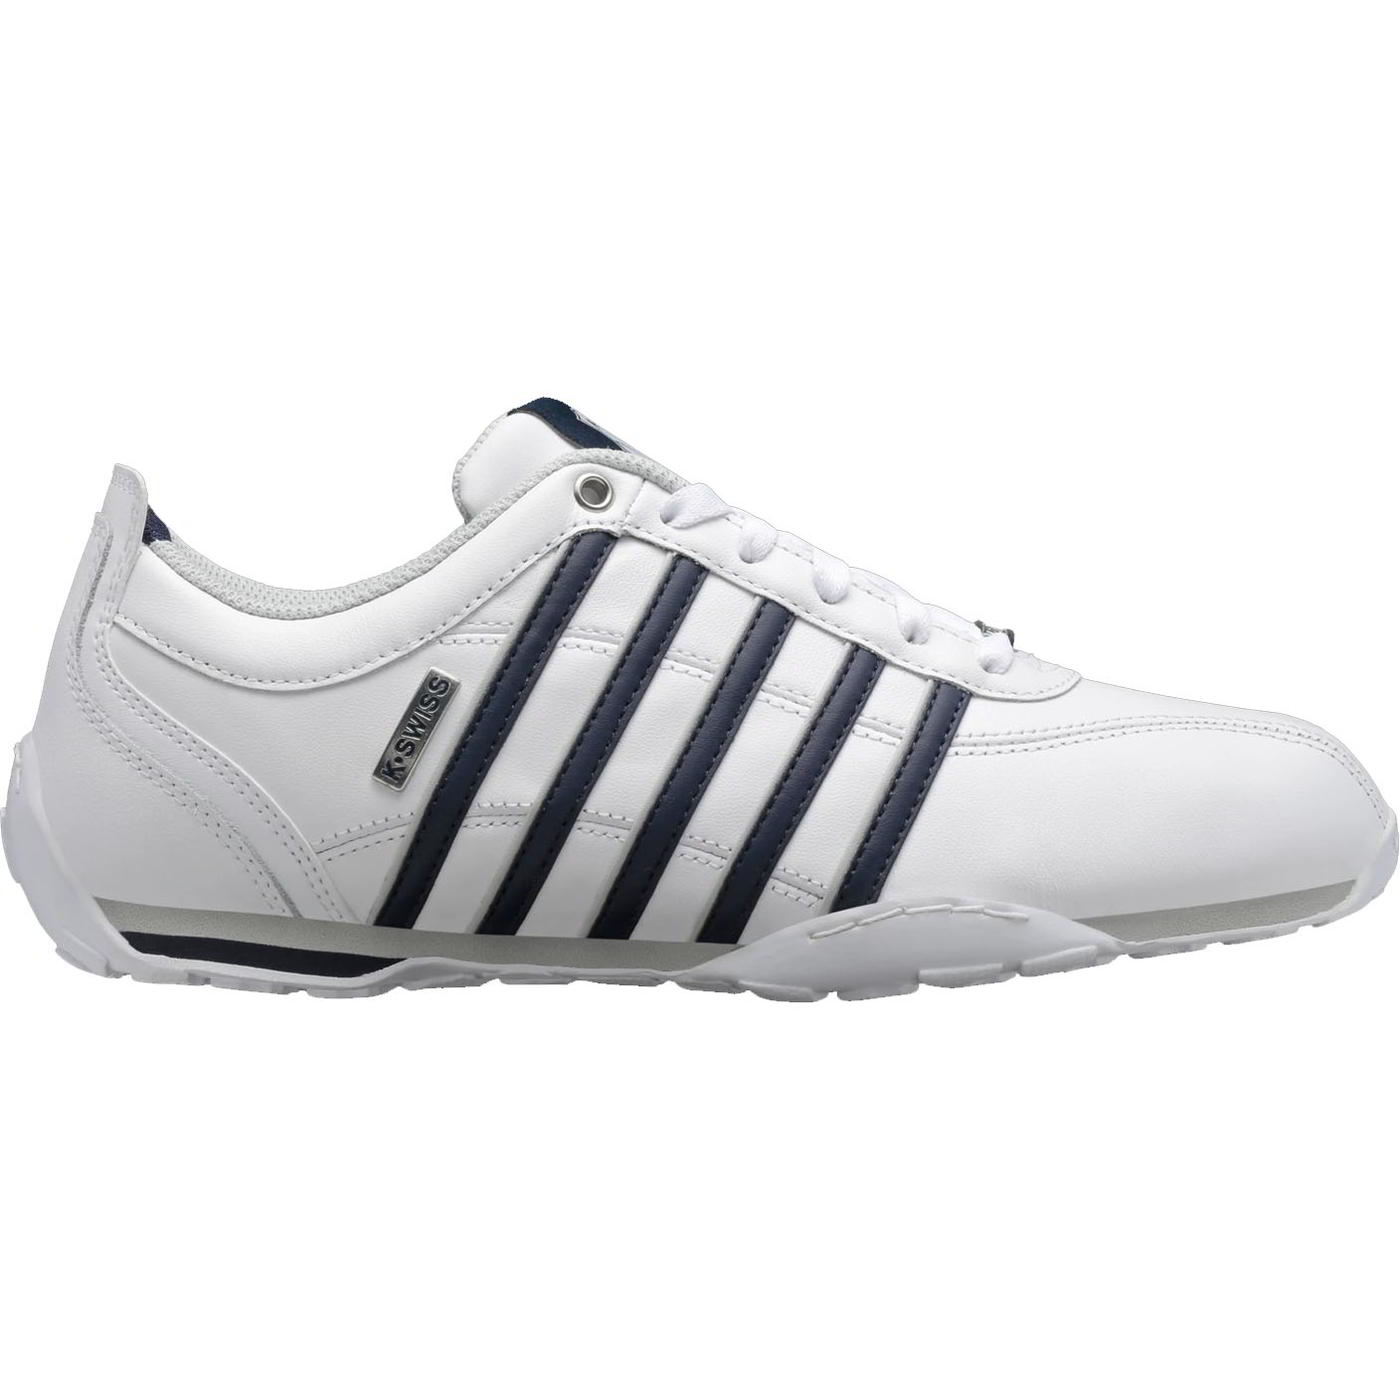 K-Swiss Mens Arvee 1.5 Leather Trainers Shoes - White Navy Grey Violet - UK 8.5